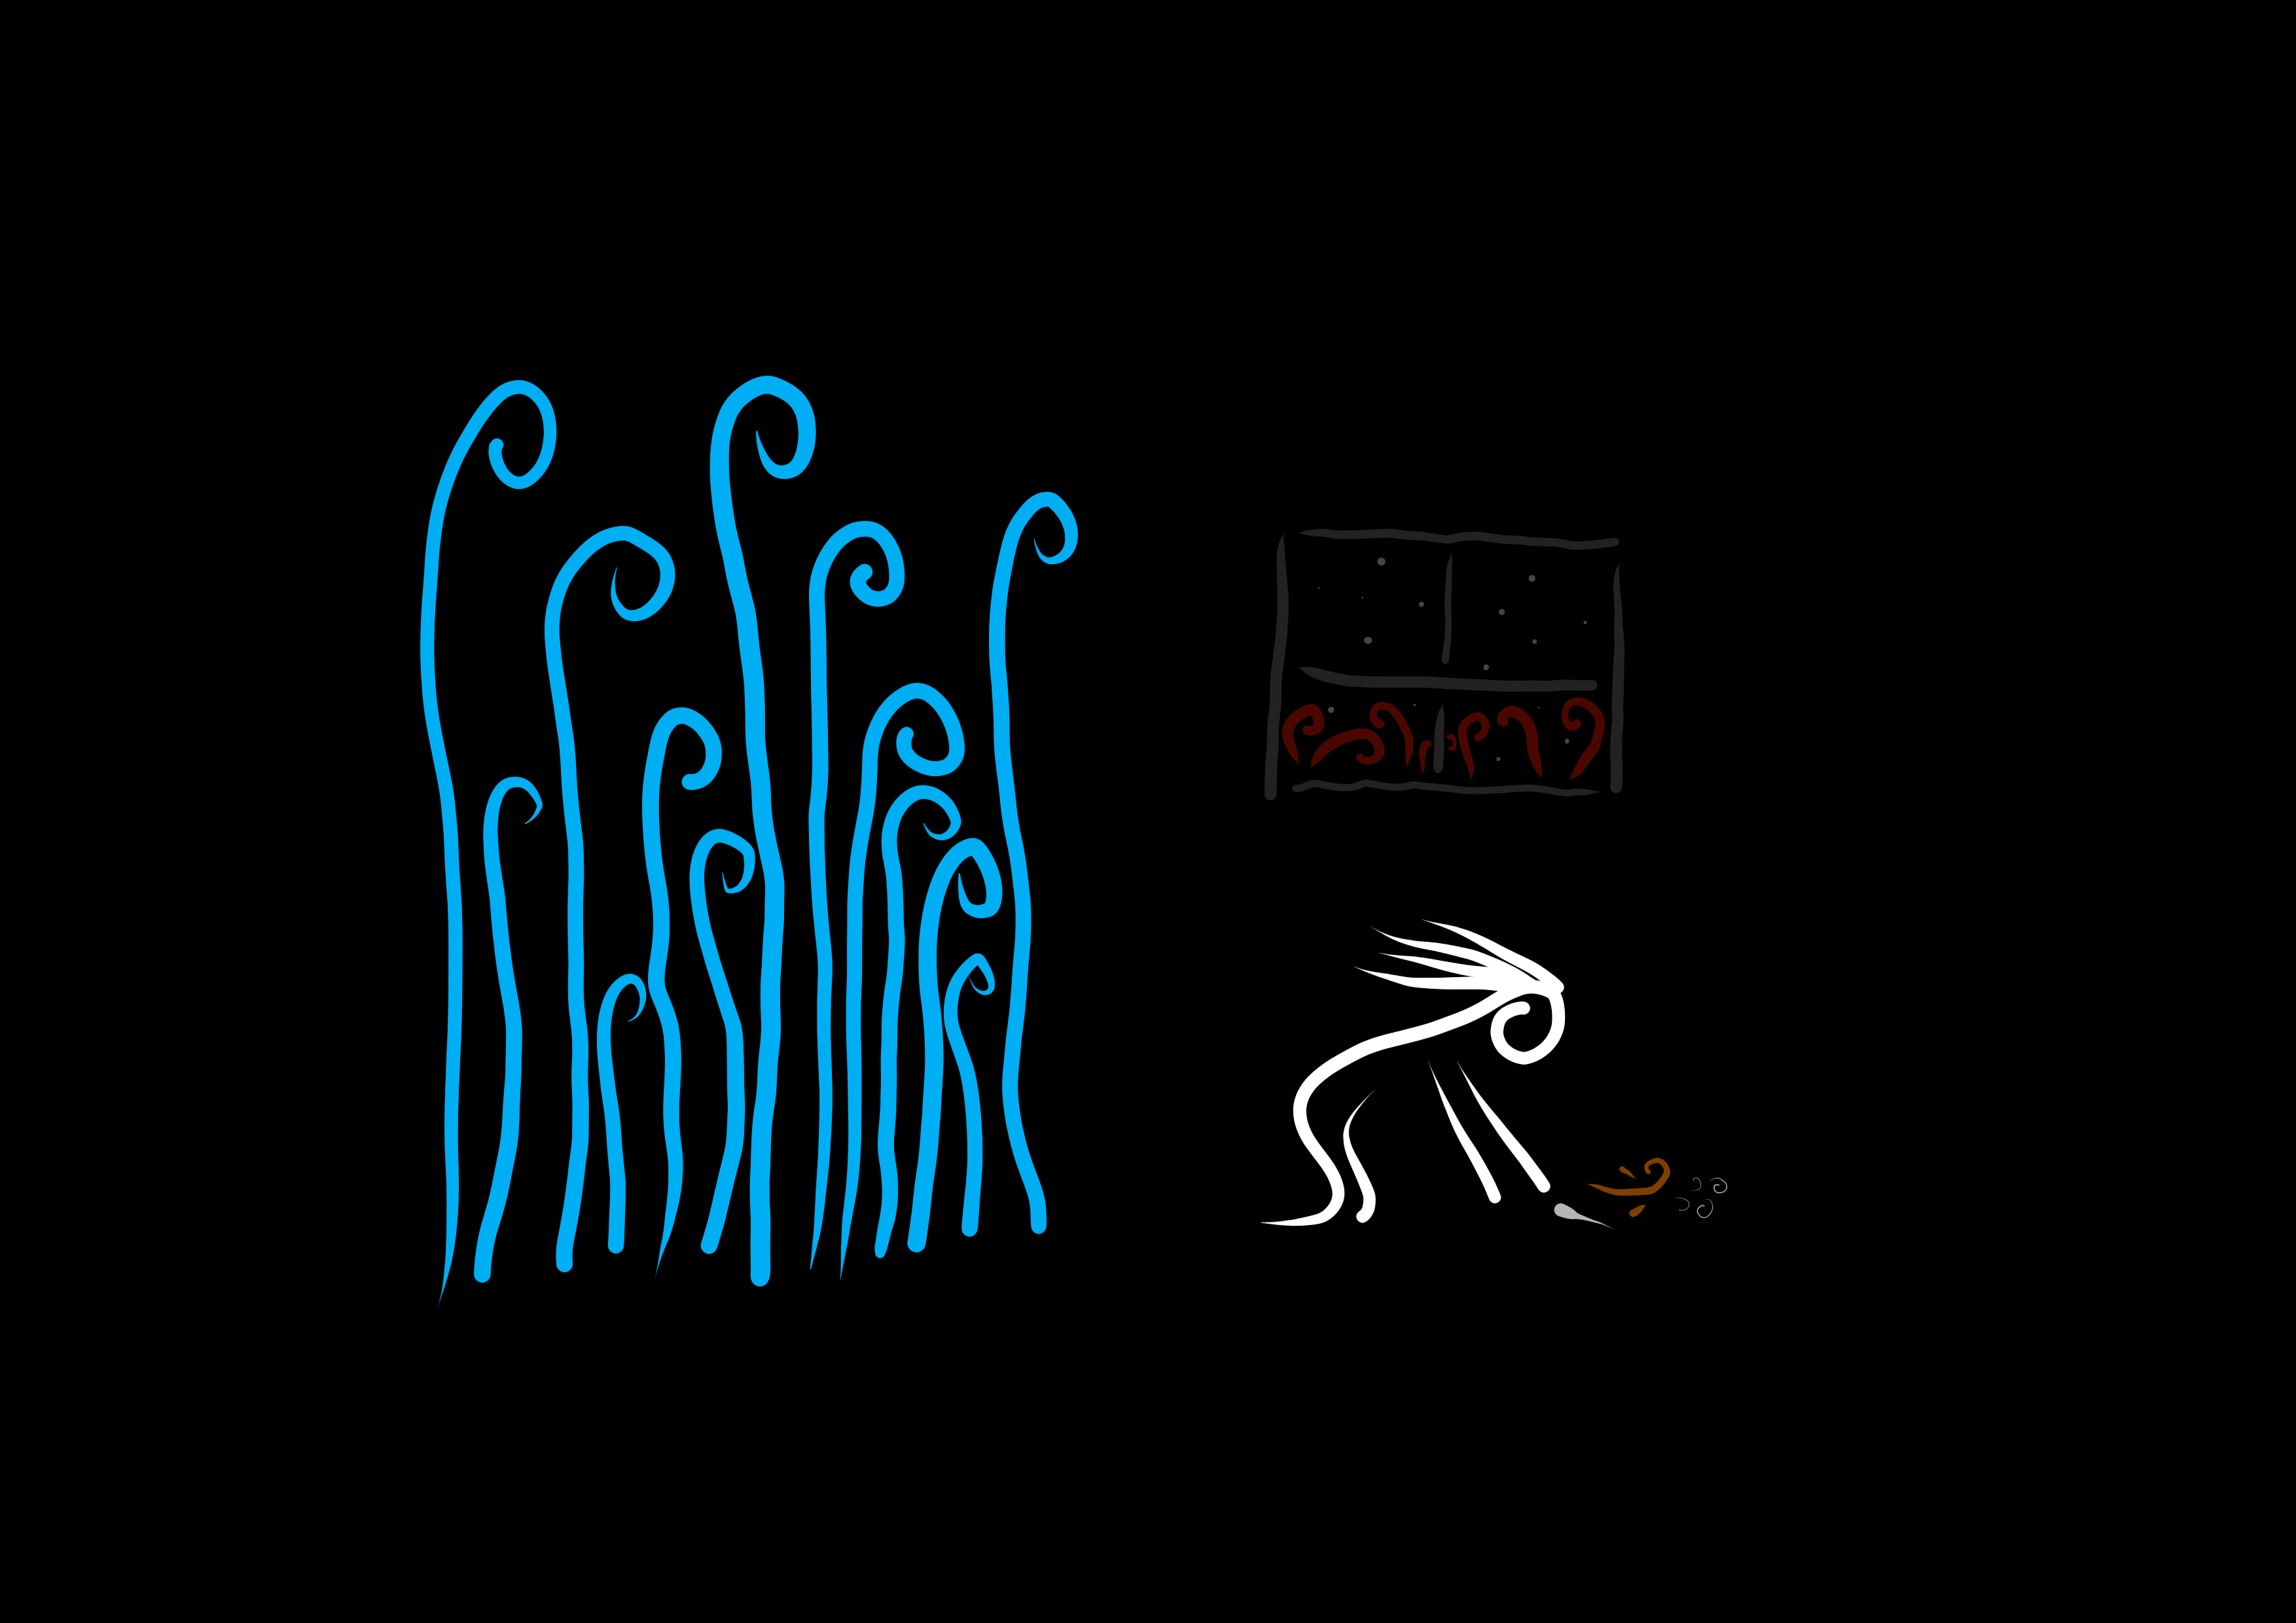 minimalist art depicting a group of blue beings crowded behind a figure on its hands and knees, with a stuffed animal and knife in front of it. in the background, red tendrils are visible outside a window